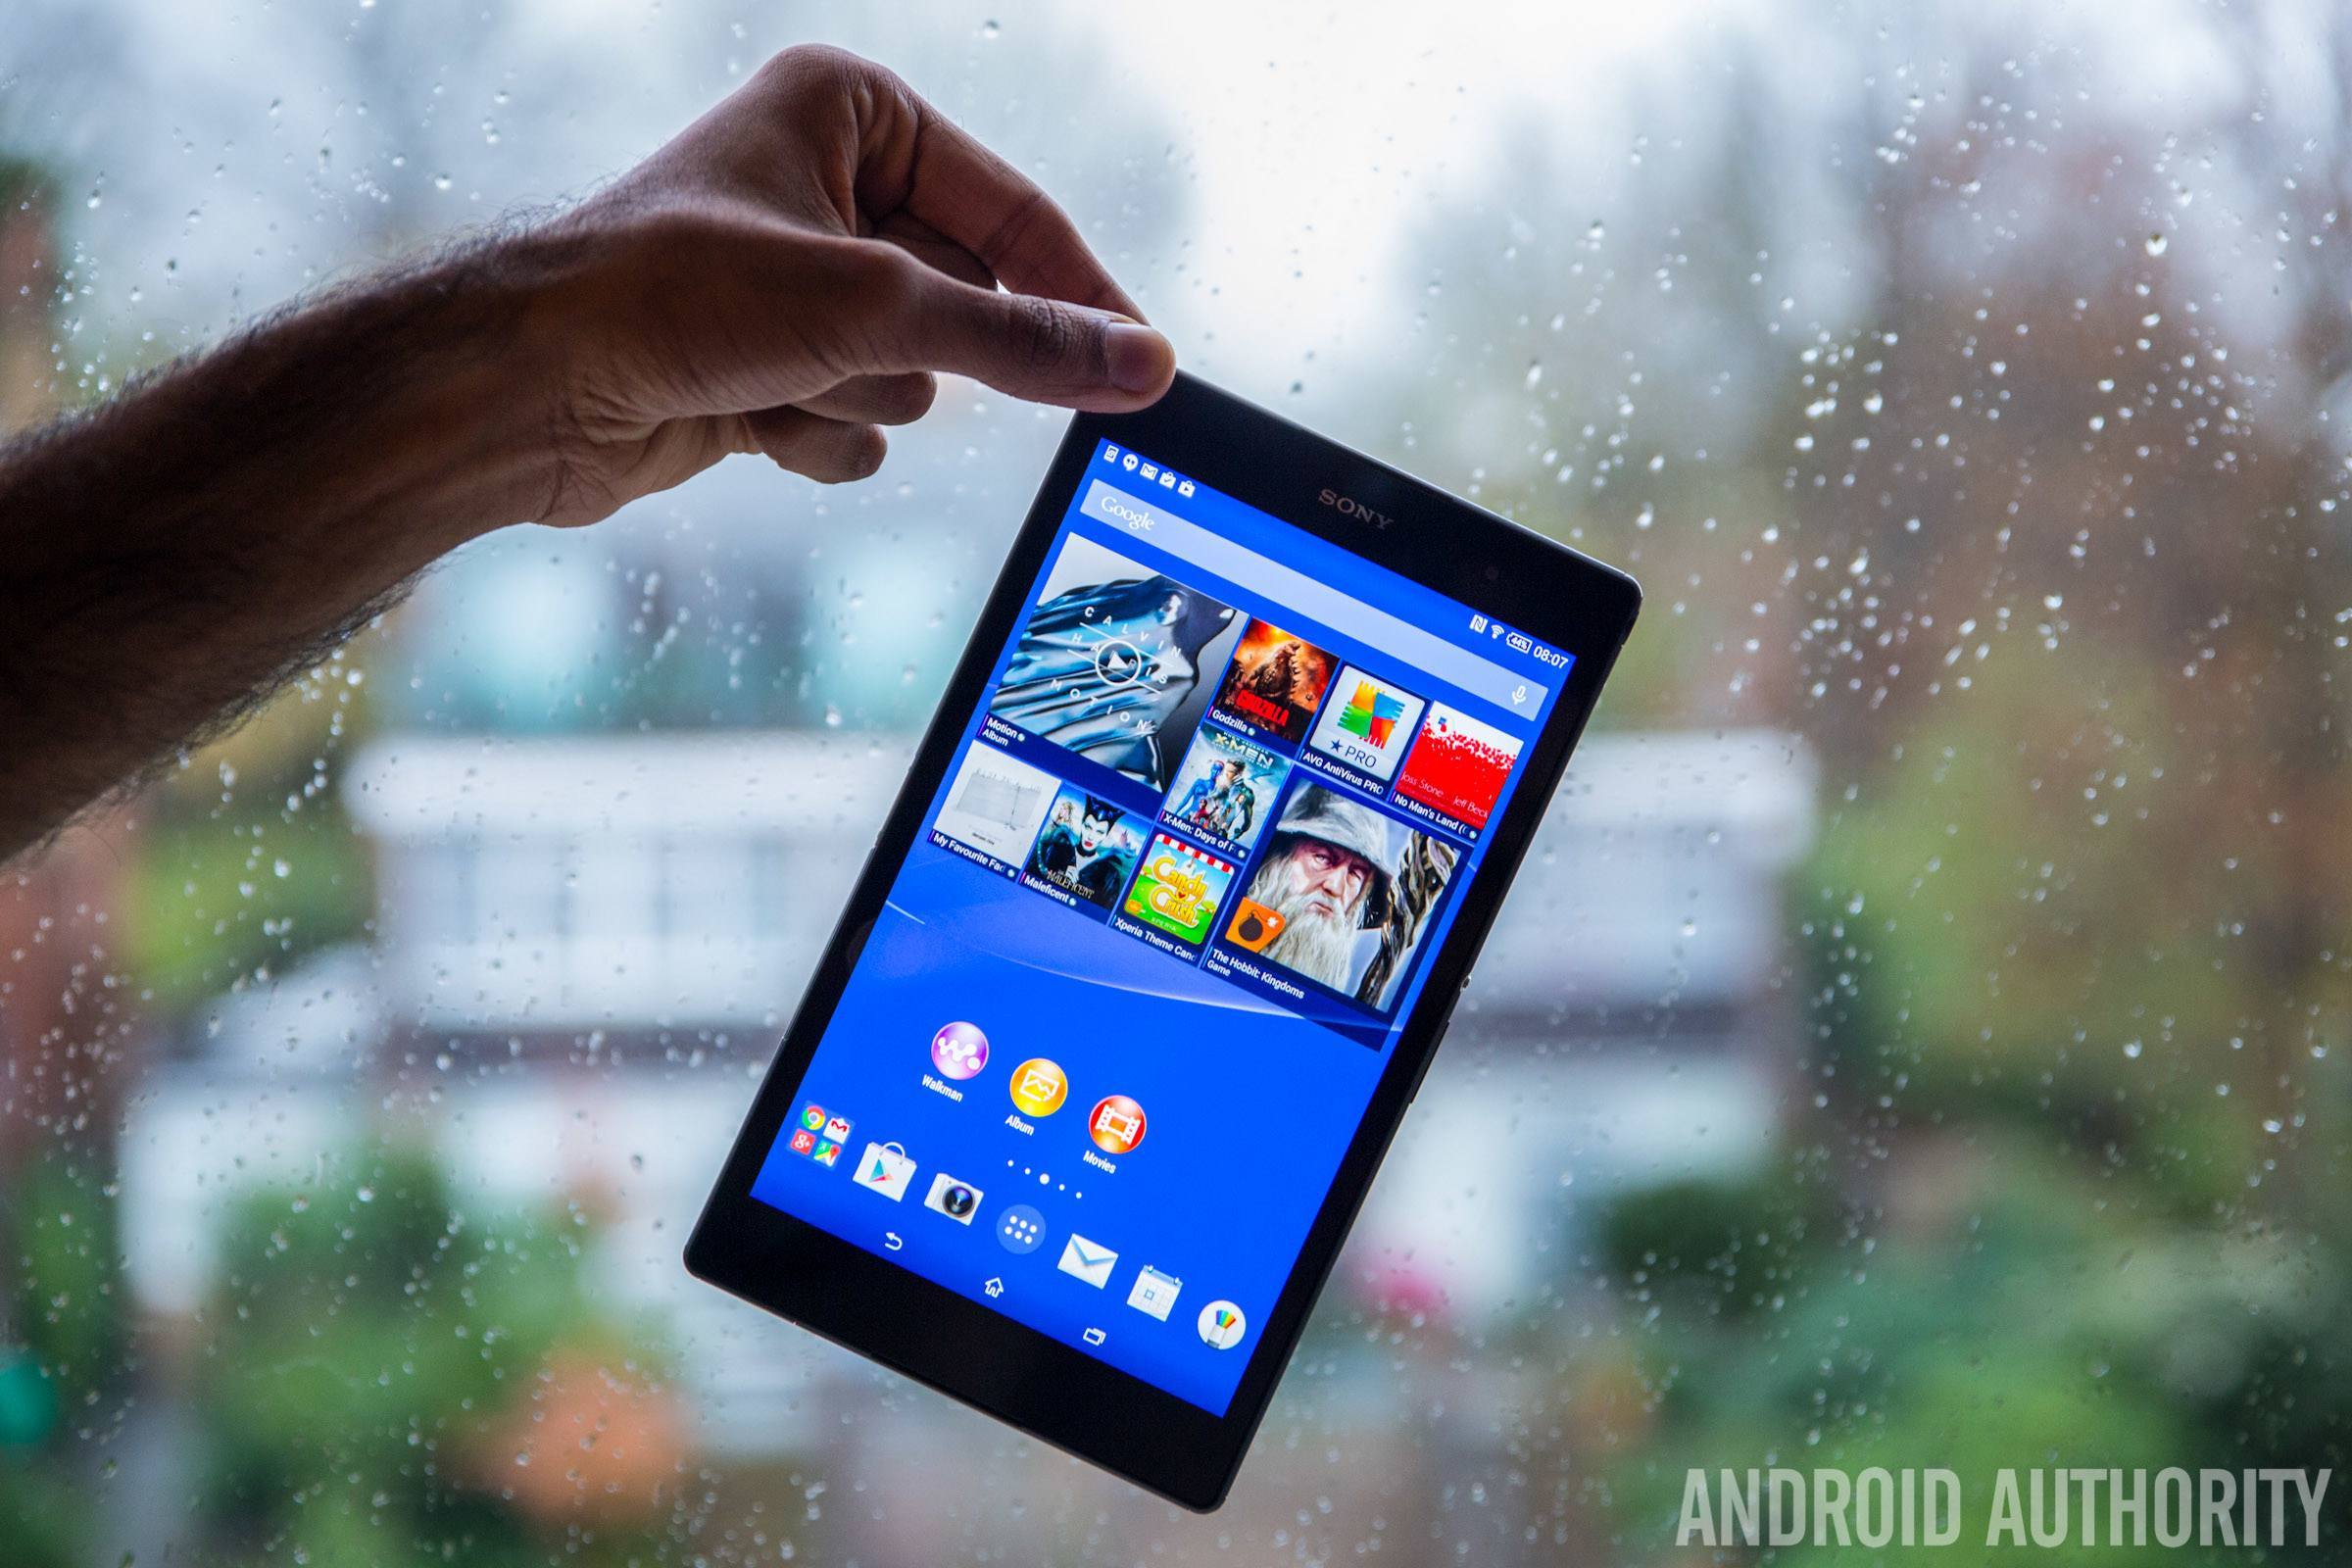 Berekening Behandeling Bewusteloos Sony Xperia Z3 Tablet Compact unboxing and first impressions